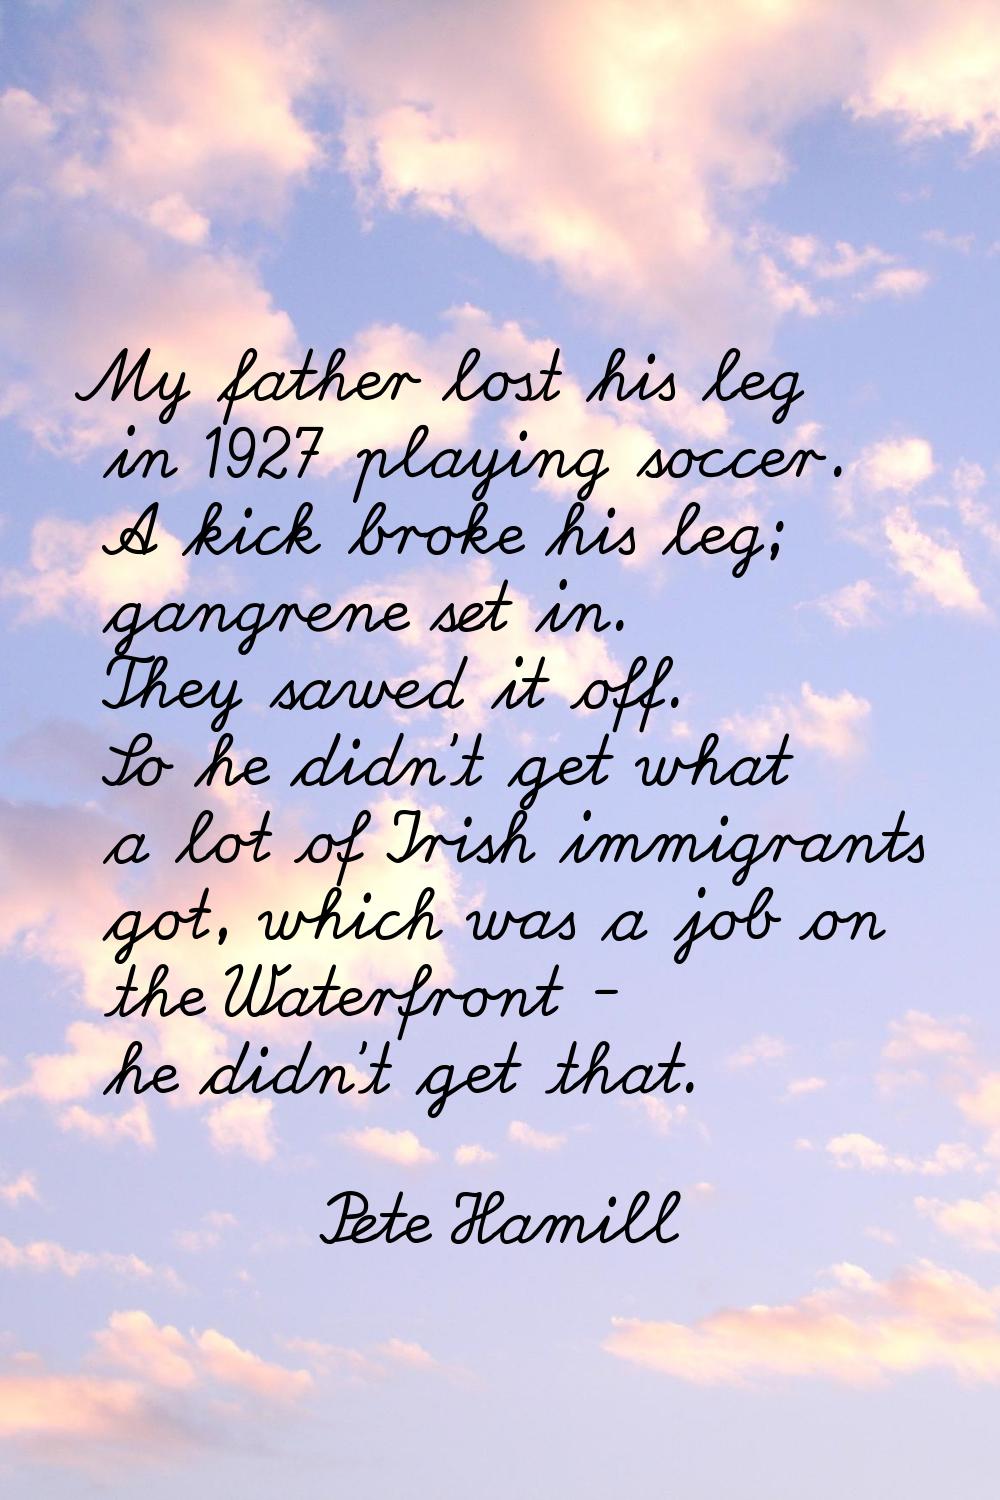 My father lost his leg in 1927 playing soccer. A kick broke his leg; gangrene set in. They sawed it